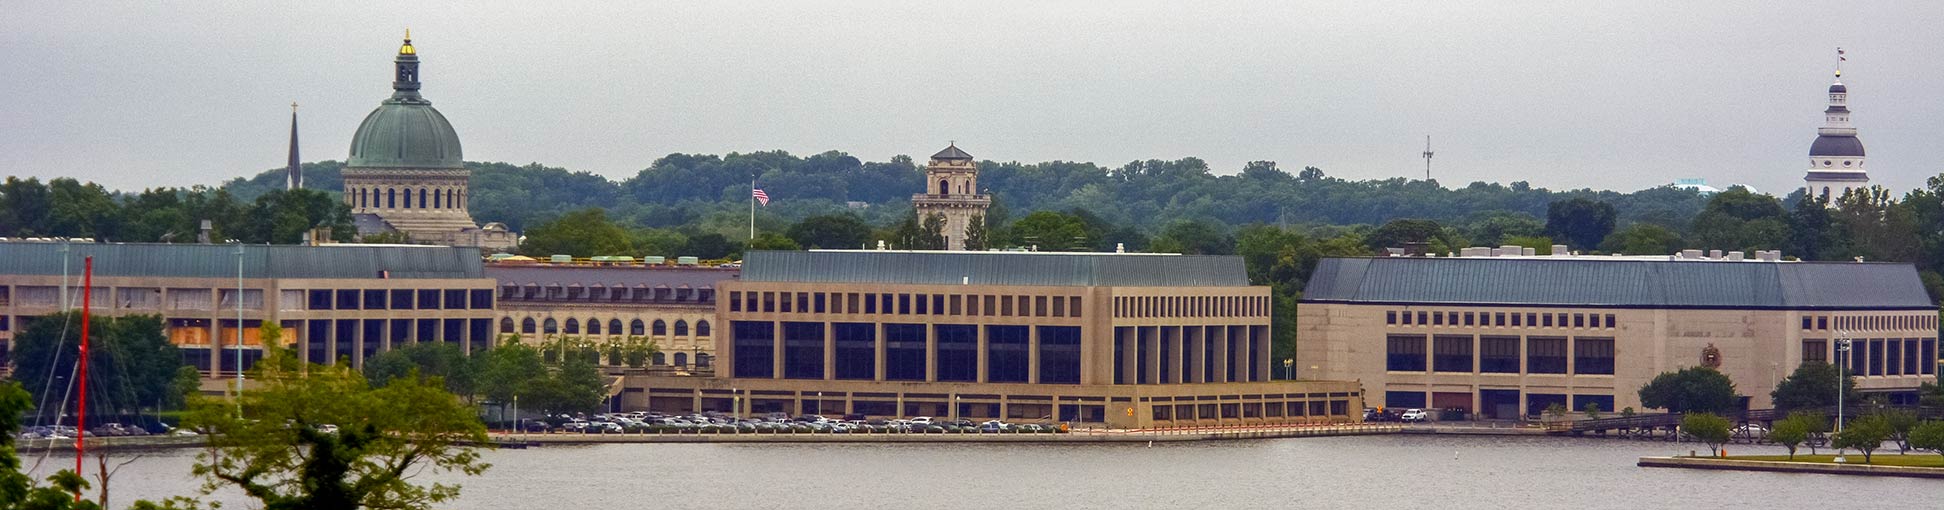 United States Naval Academy in Annapolis, Maryland